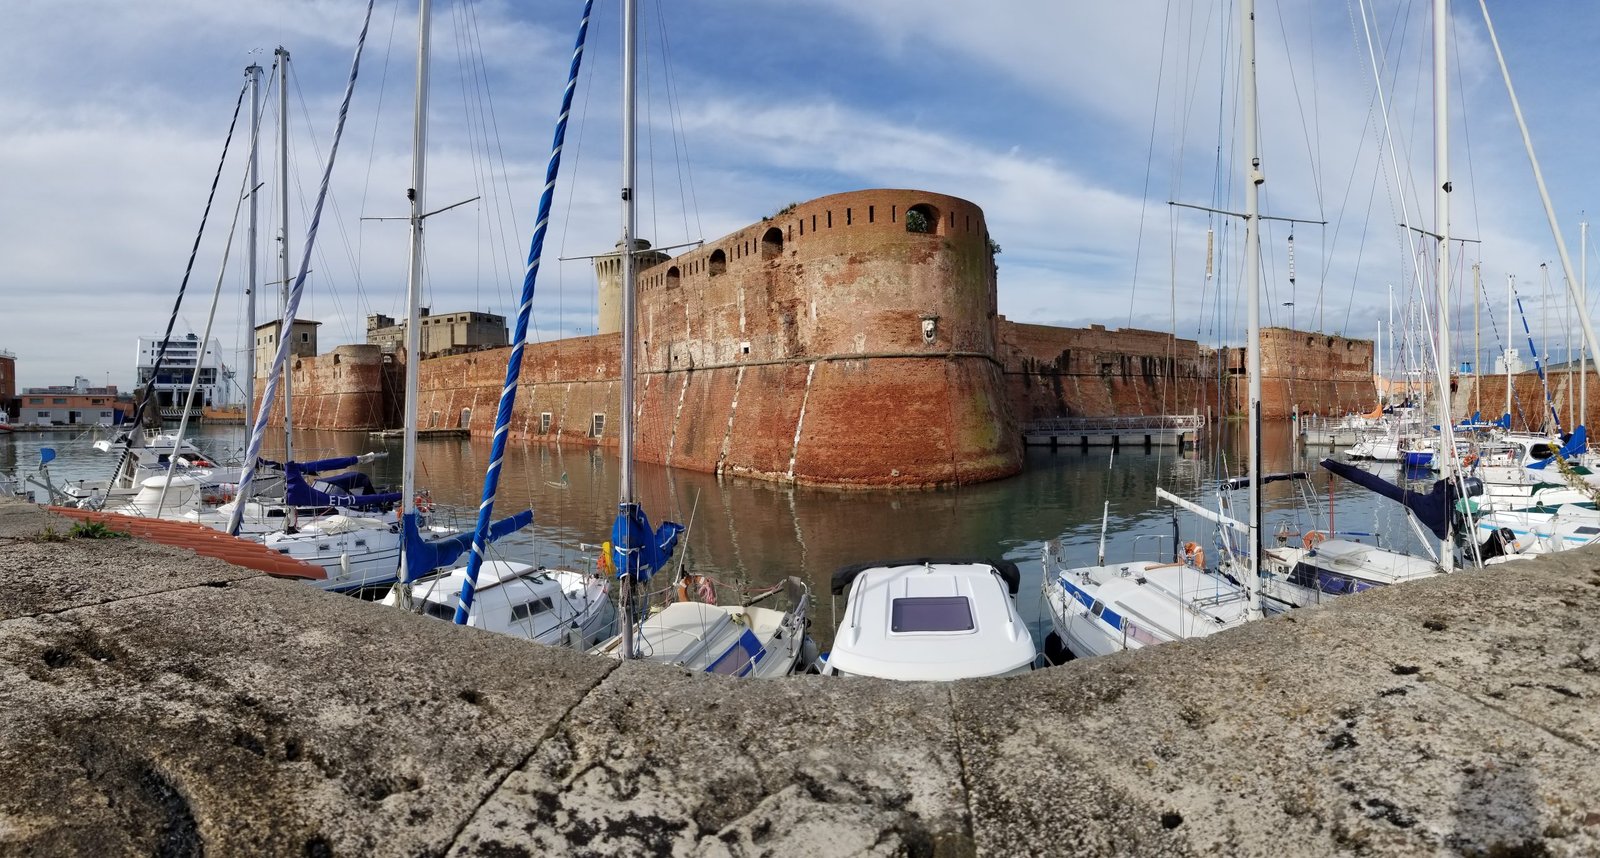 Final edition of our one-year adventure in Italy. Months 11 & 12